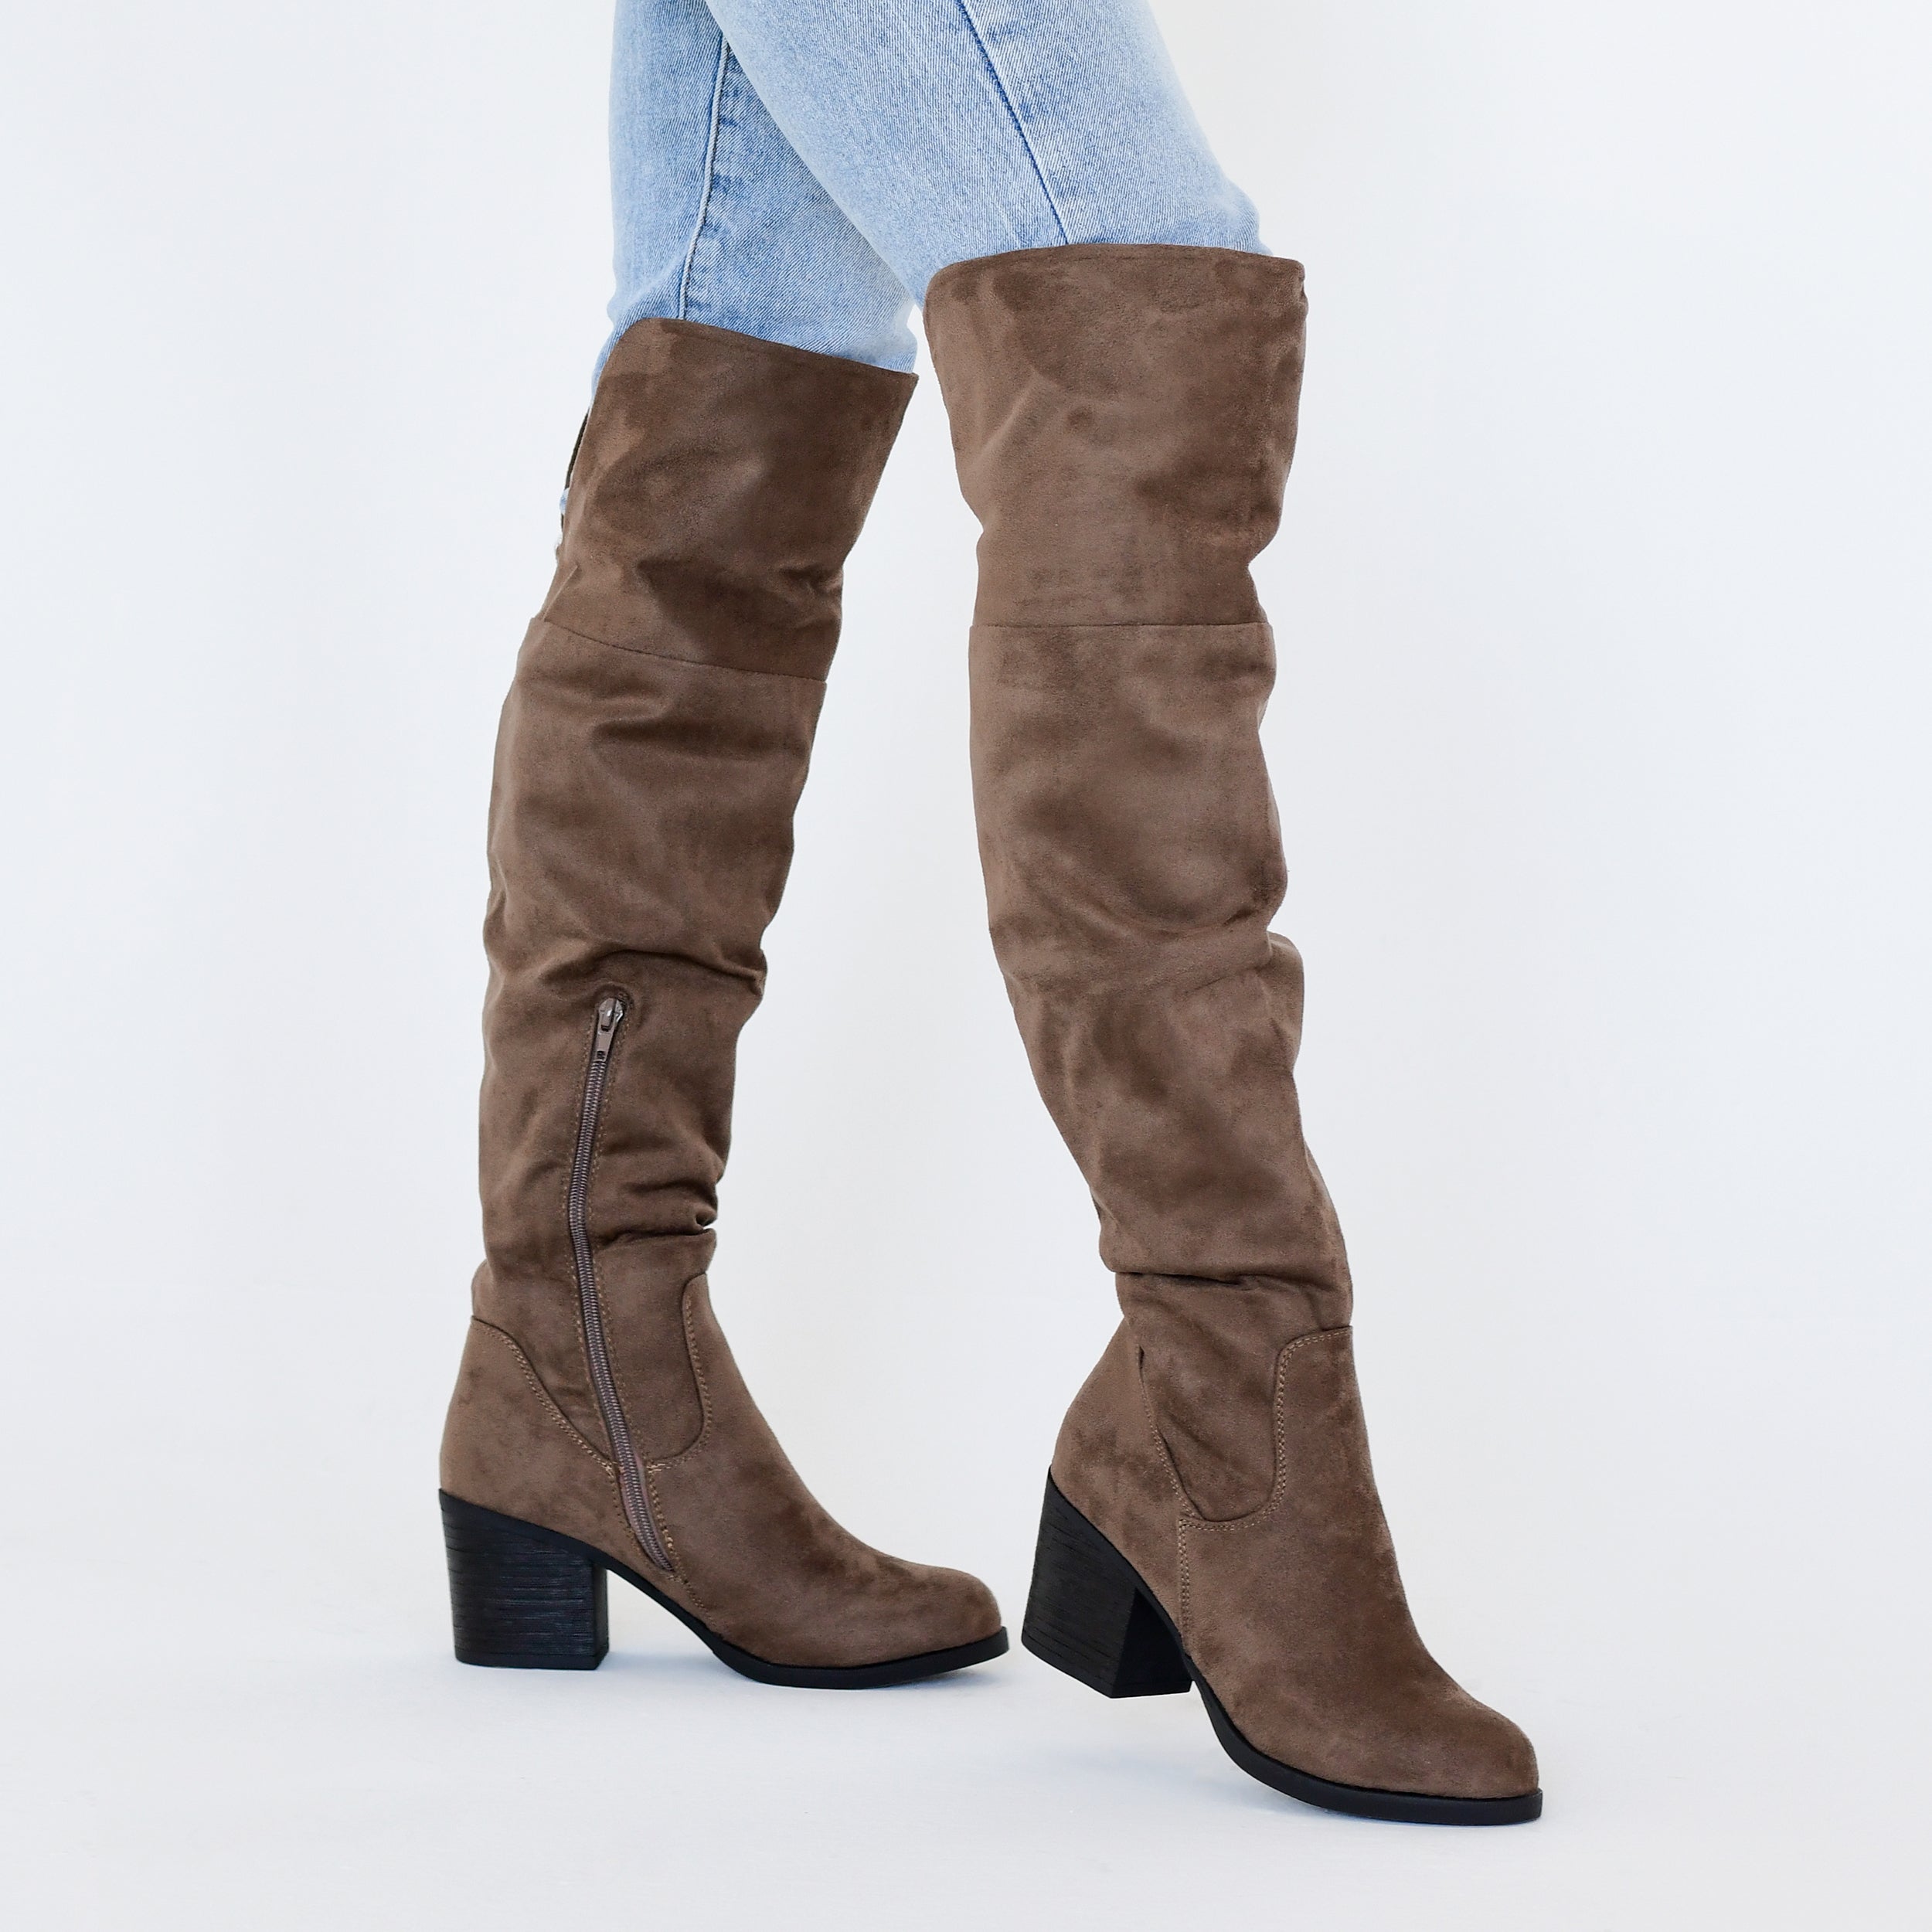 Sana Boot | Women\'s Over The Knee Boots | Journee Collection